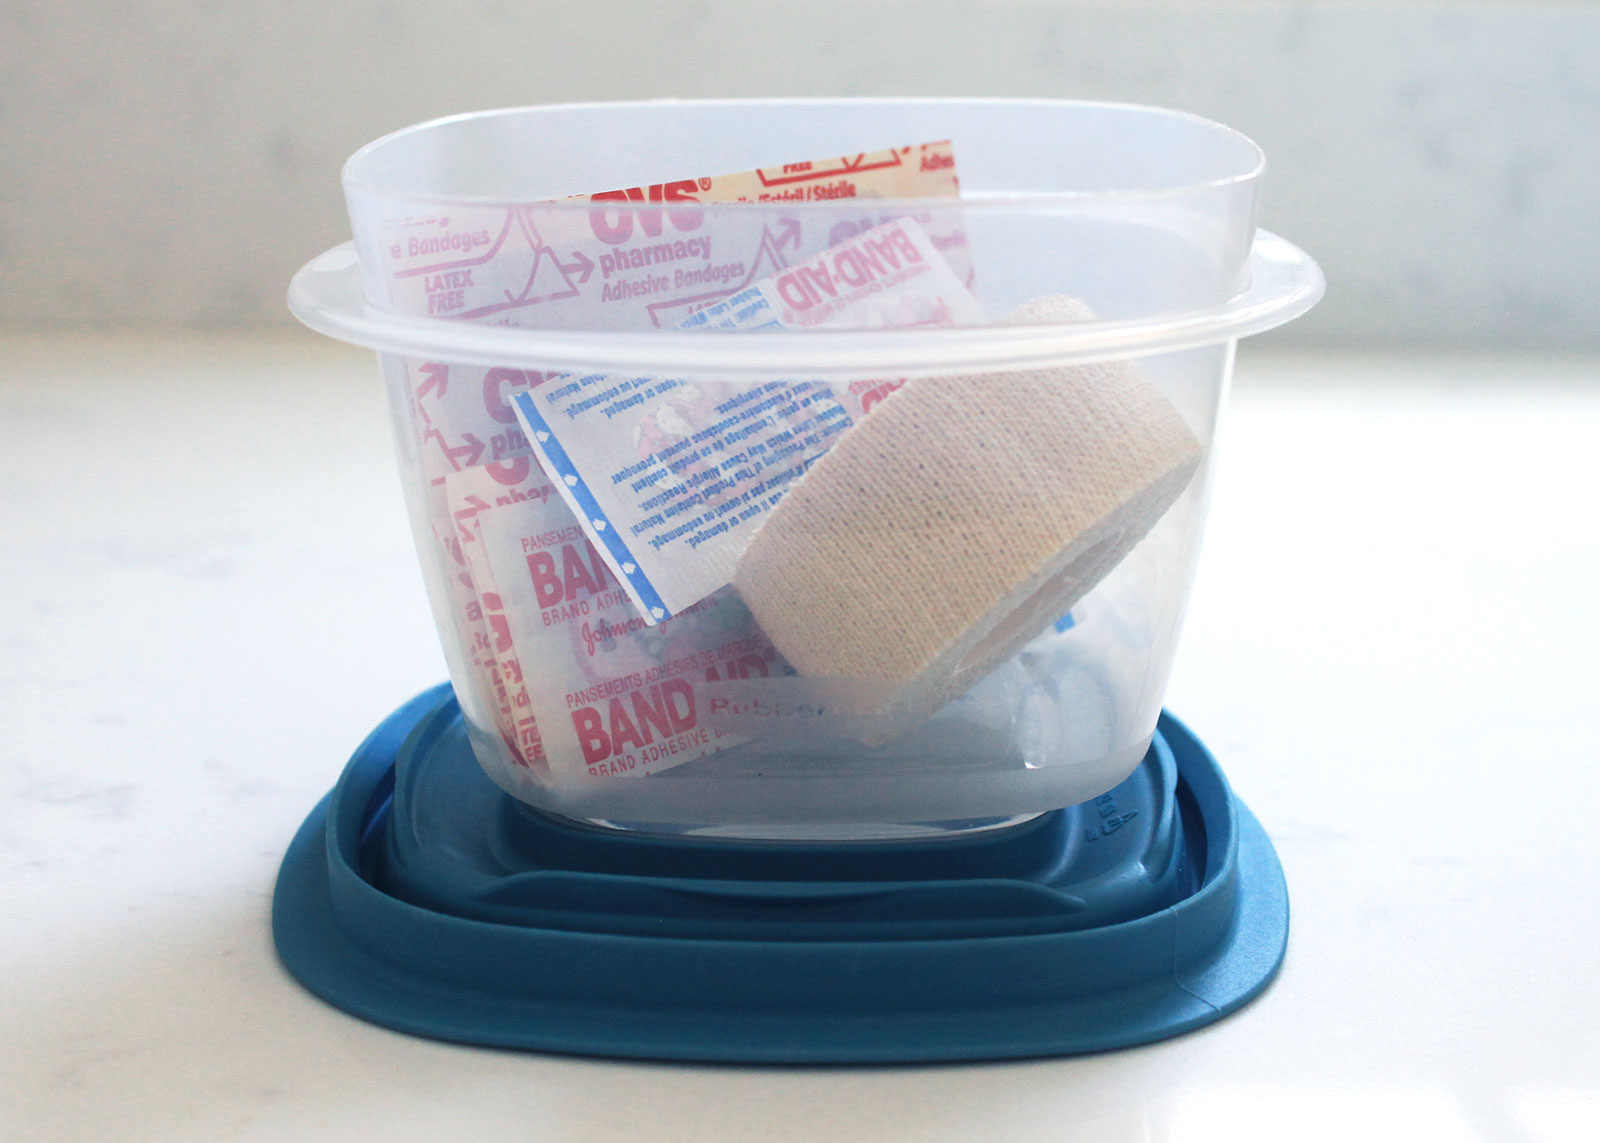 Repurpose plastic containers to store first aid kits